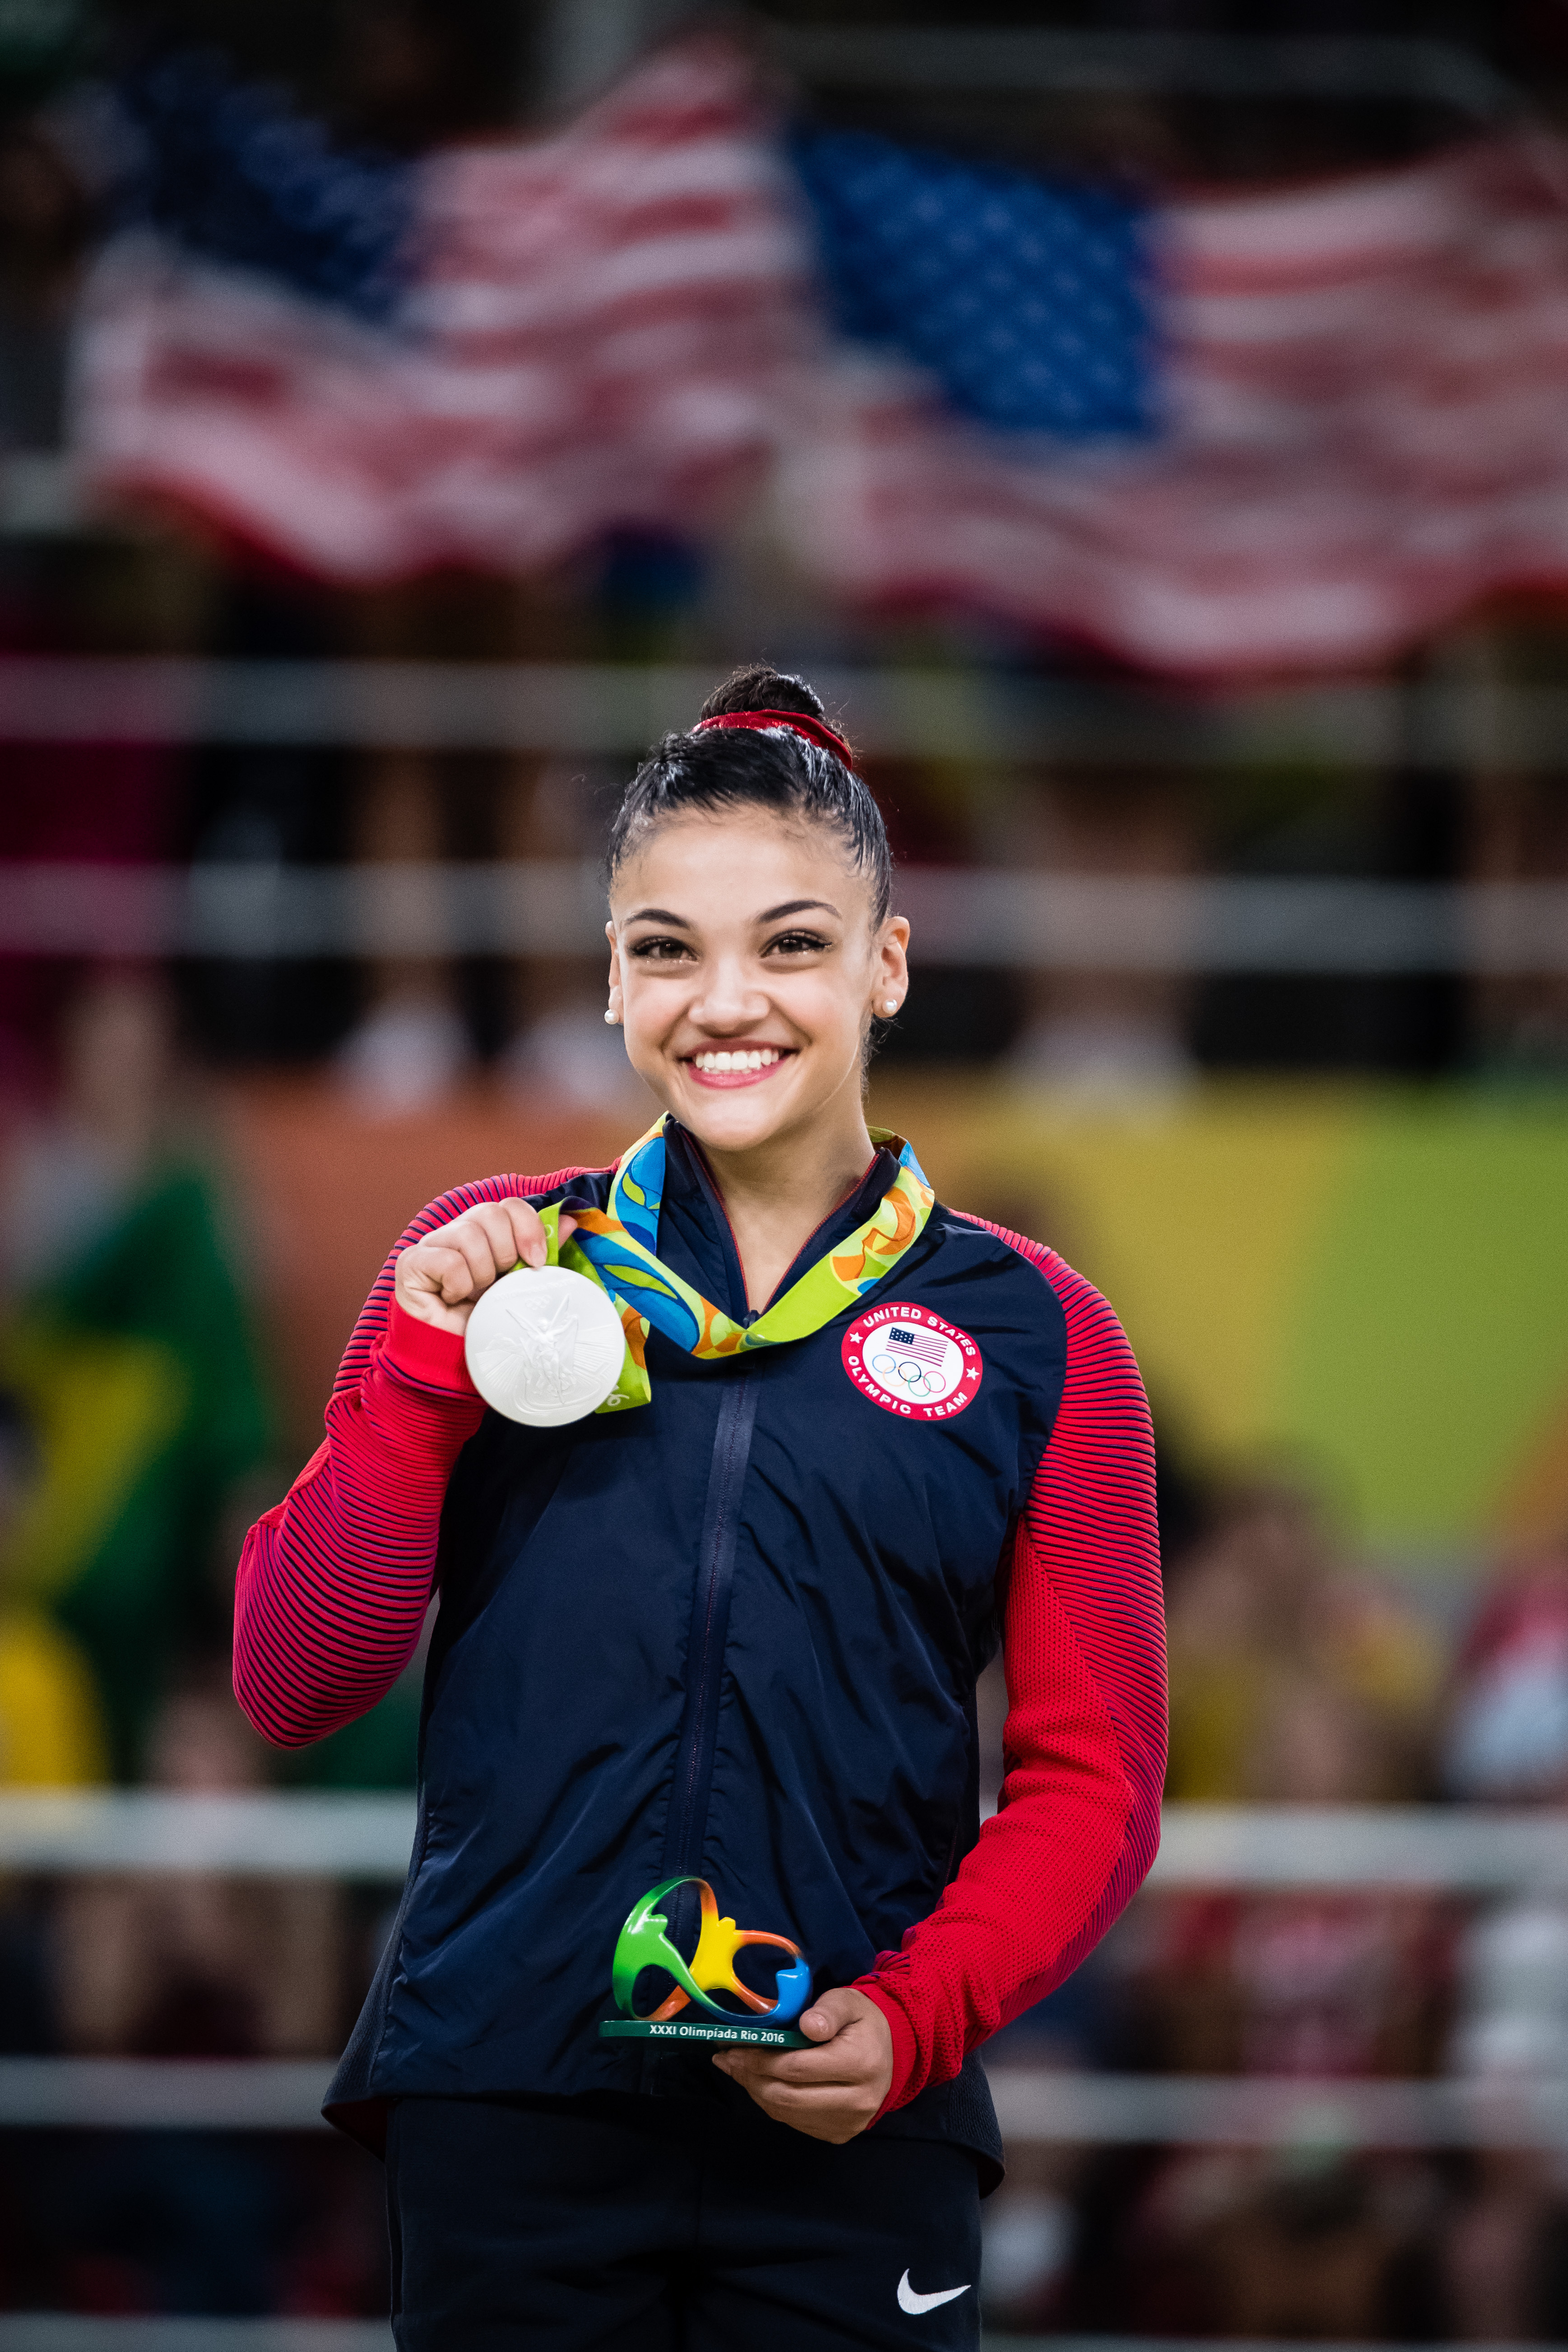 Laurie Hernandez: How my Puerto Rican heritage helped me become an Olympic  gymnast